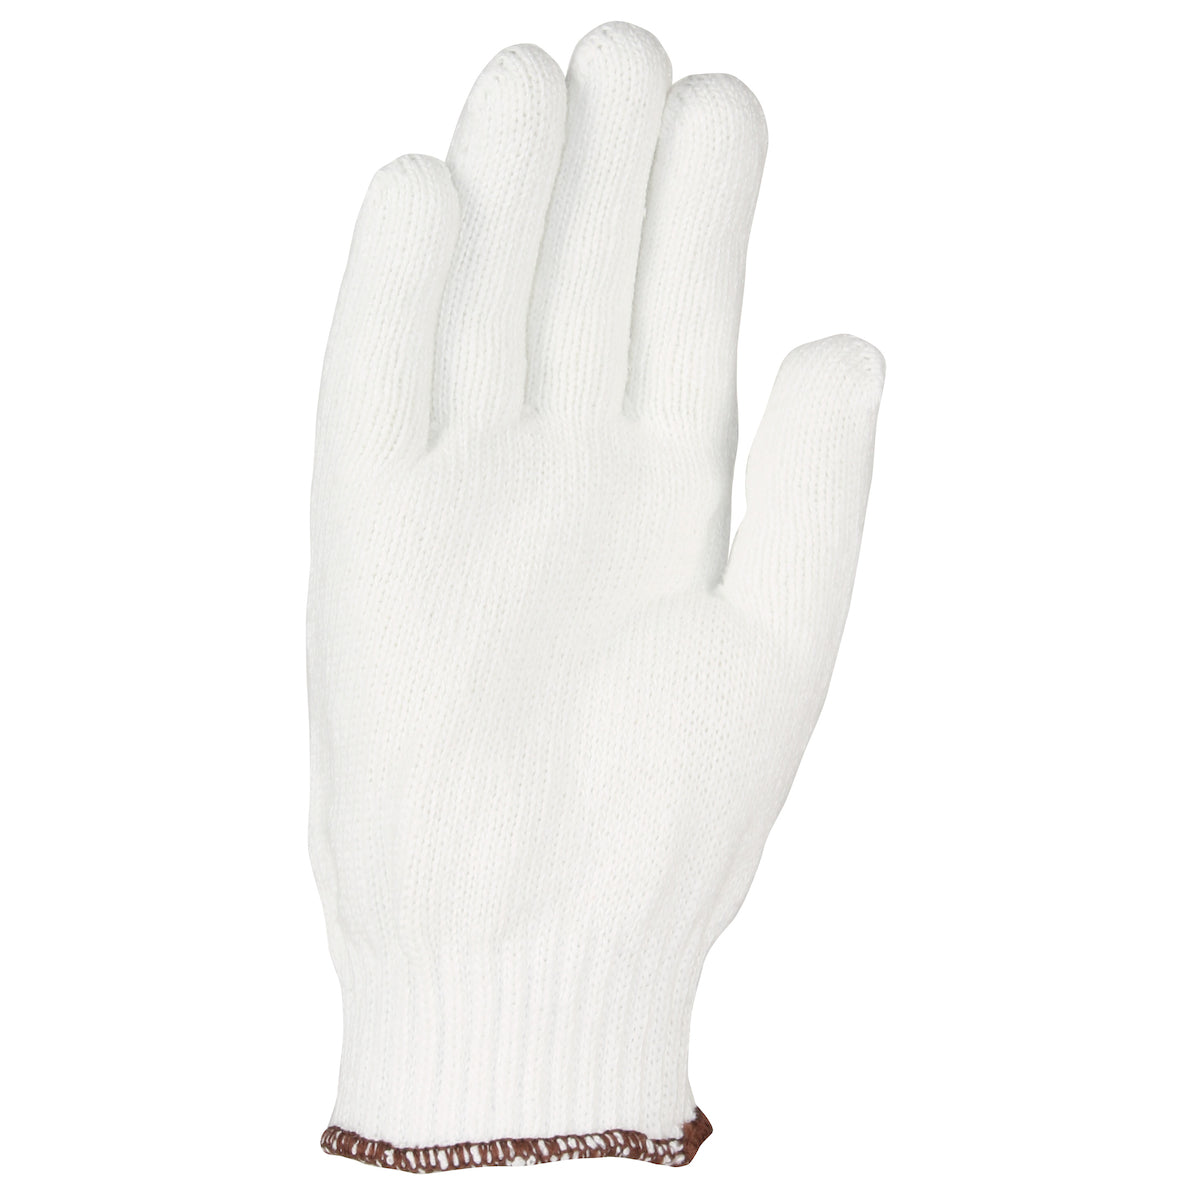 WPP MP35-2XL Seamless Knit Cotton and Polyester Glove - Heavy Weight